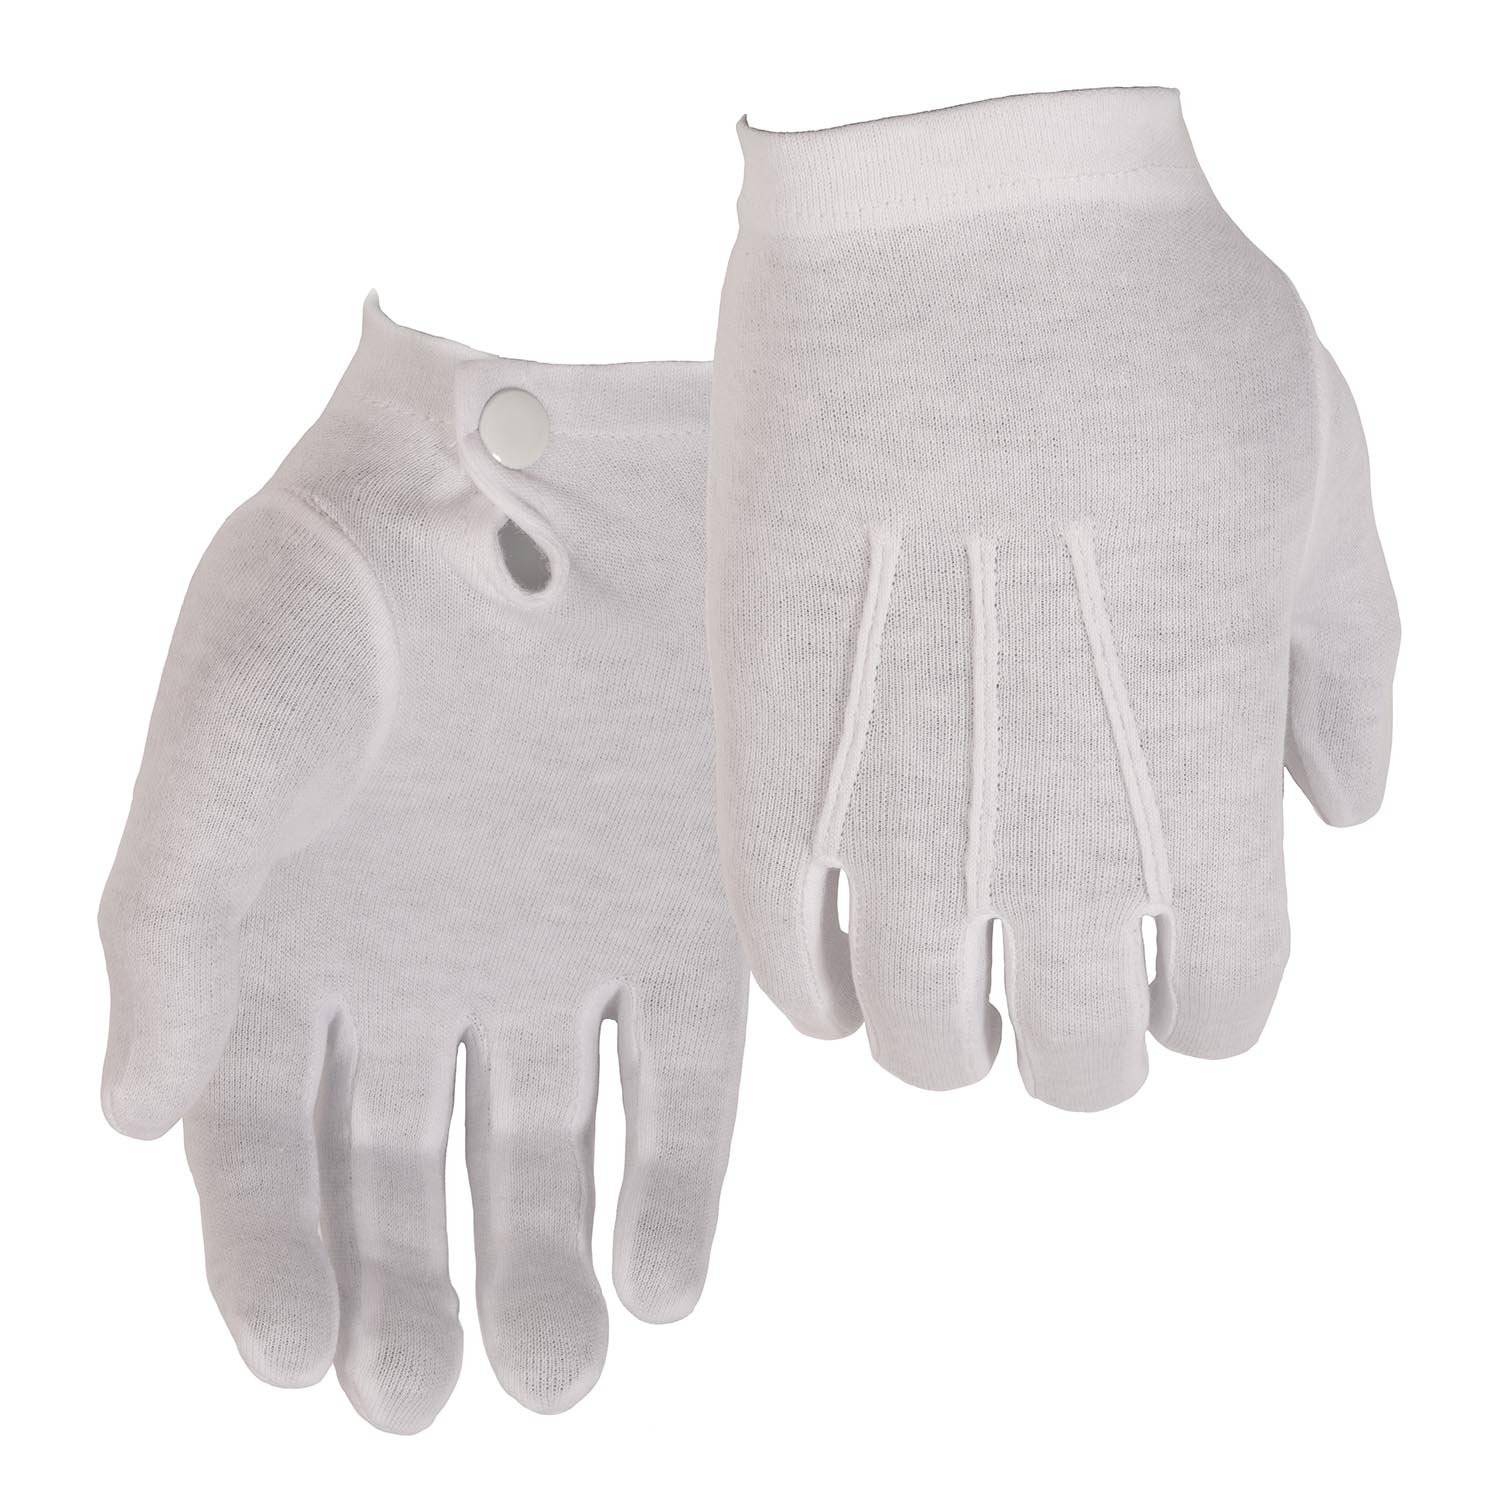 George Glove Co. Regulation Style Parade Gloves